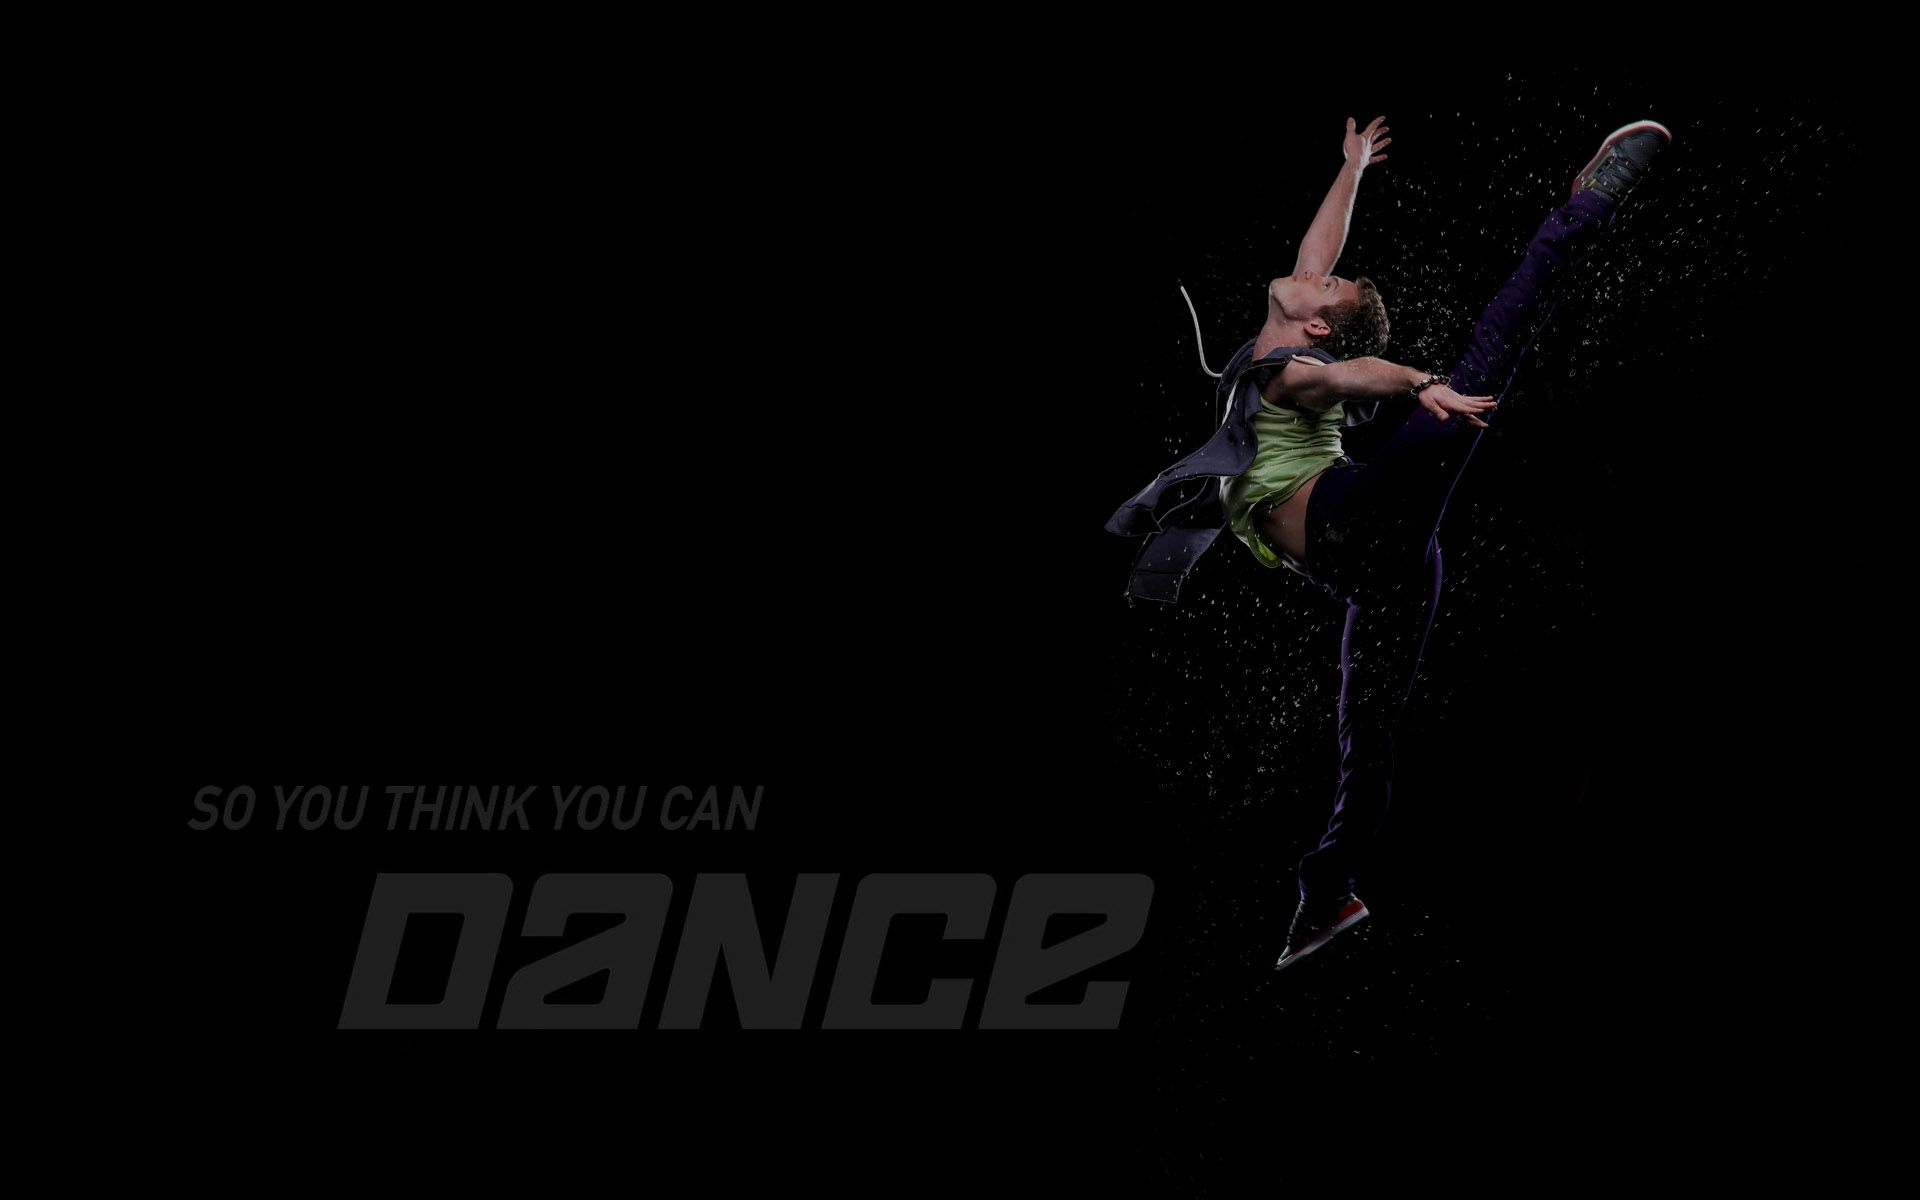 So You Think You Can Dance Computer Wallpapers, Desktop ...